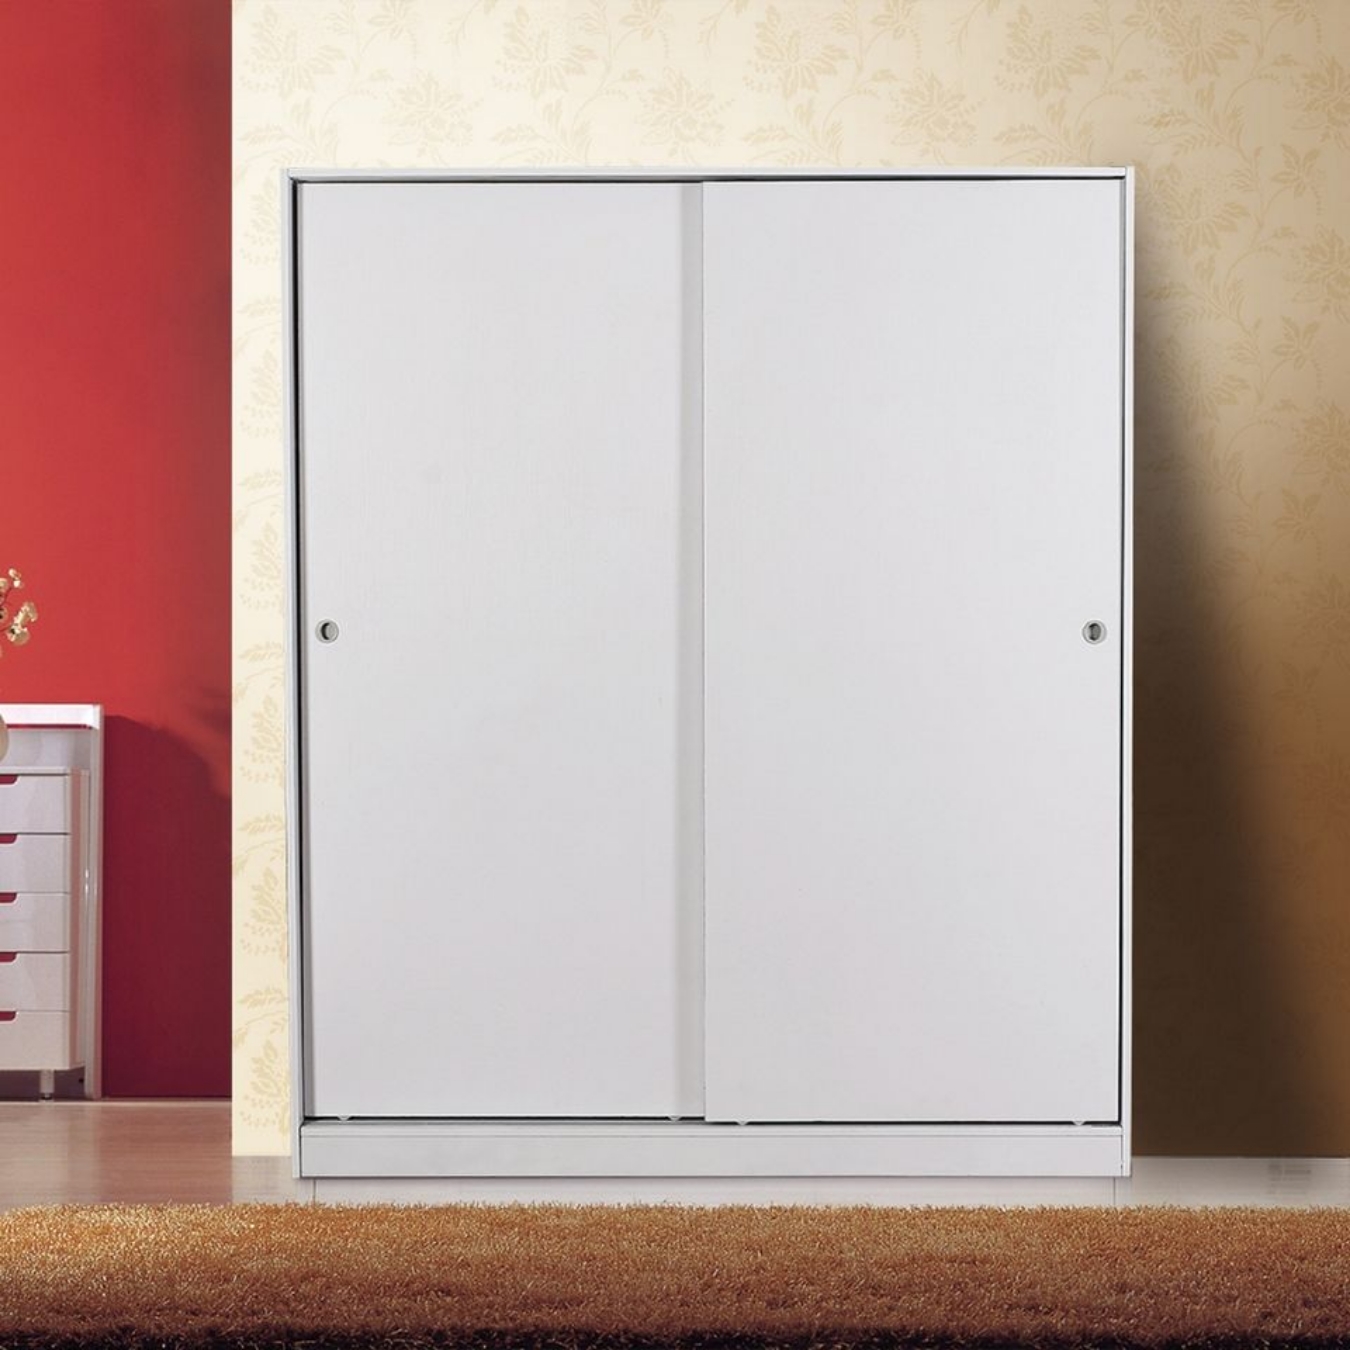 Maximize Your Space with Style and Functionality: The Redfern Sliding Door Wardrobe from Priceworth Furniture